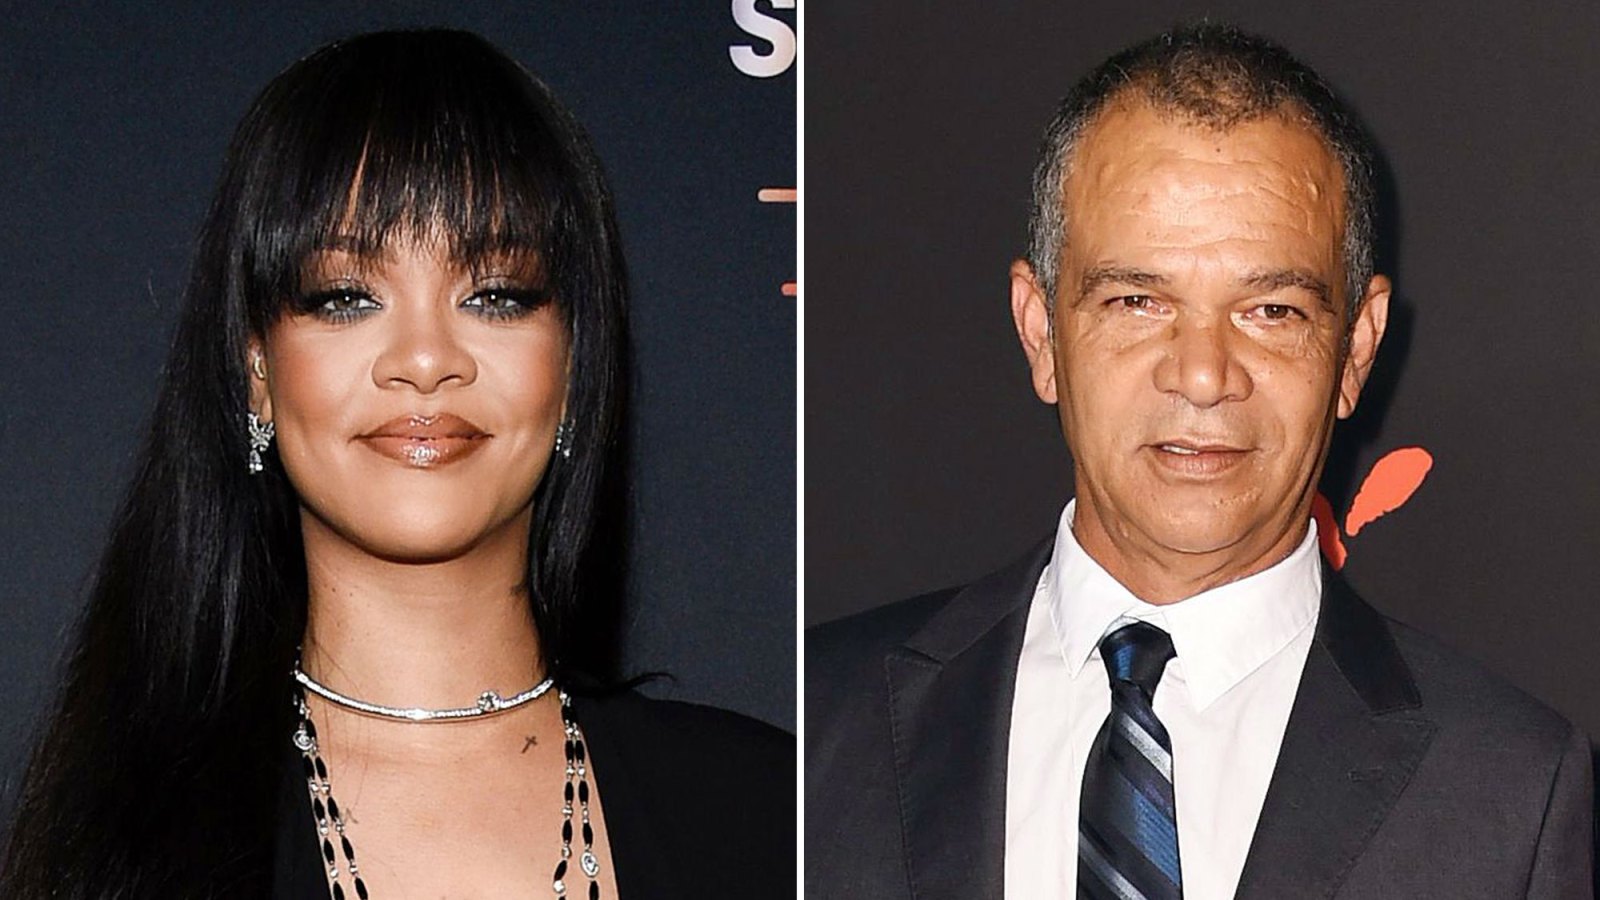 Rihanna’s Dad Ronald Fenty Couldn’t Be Happier About Her Pregnancy Shell Be an Amazing Mom